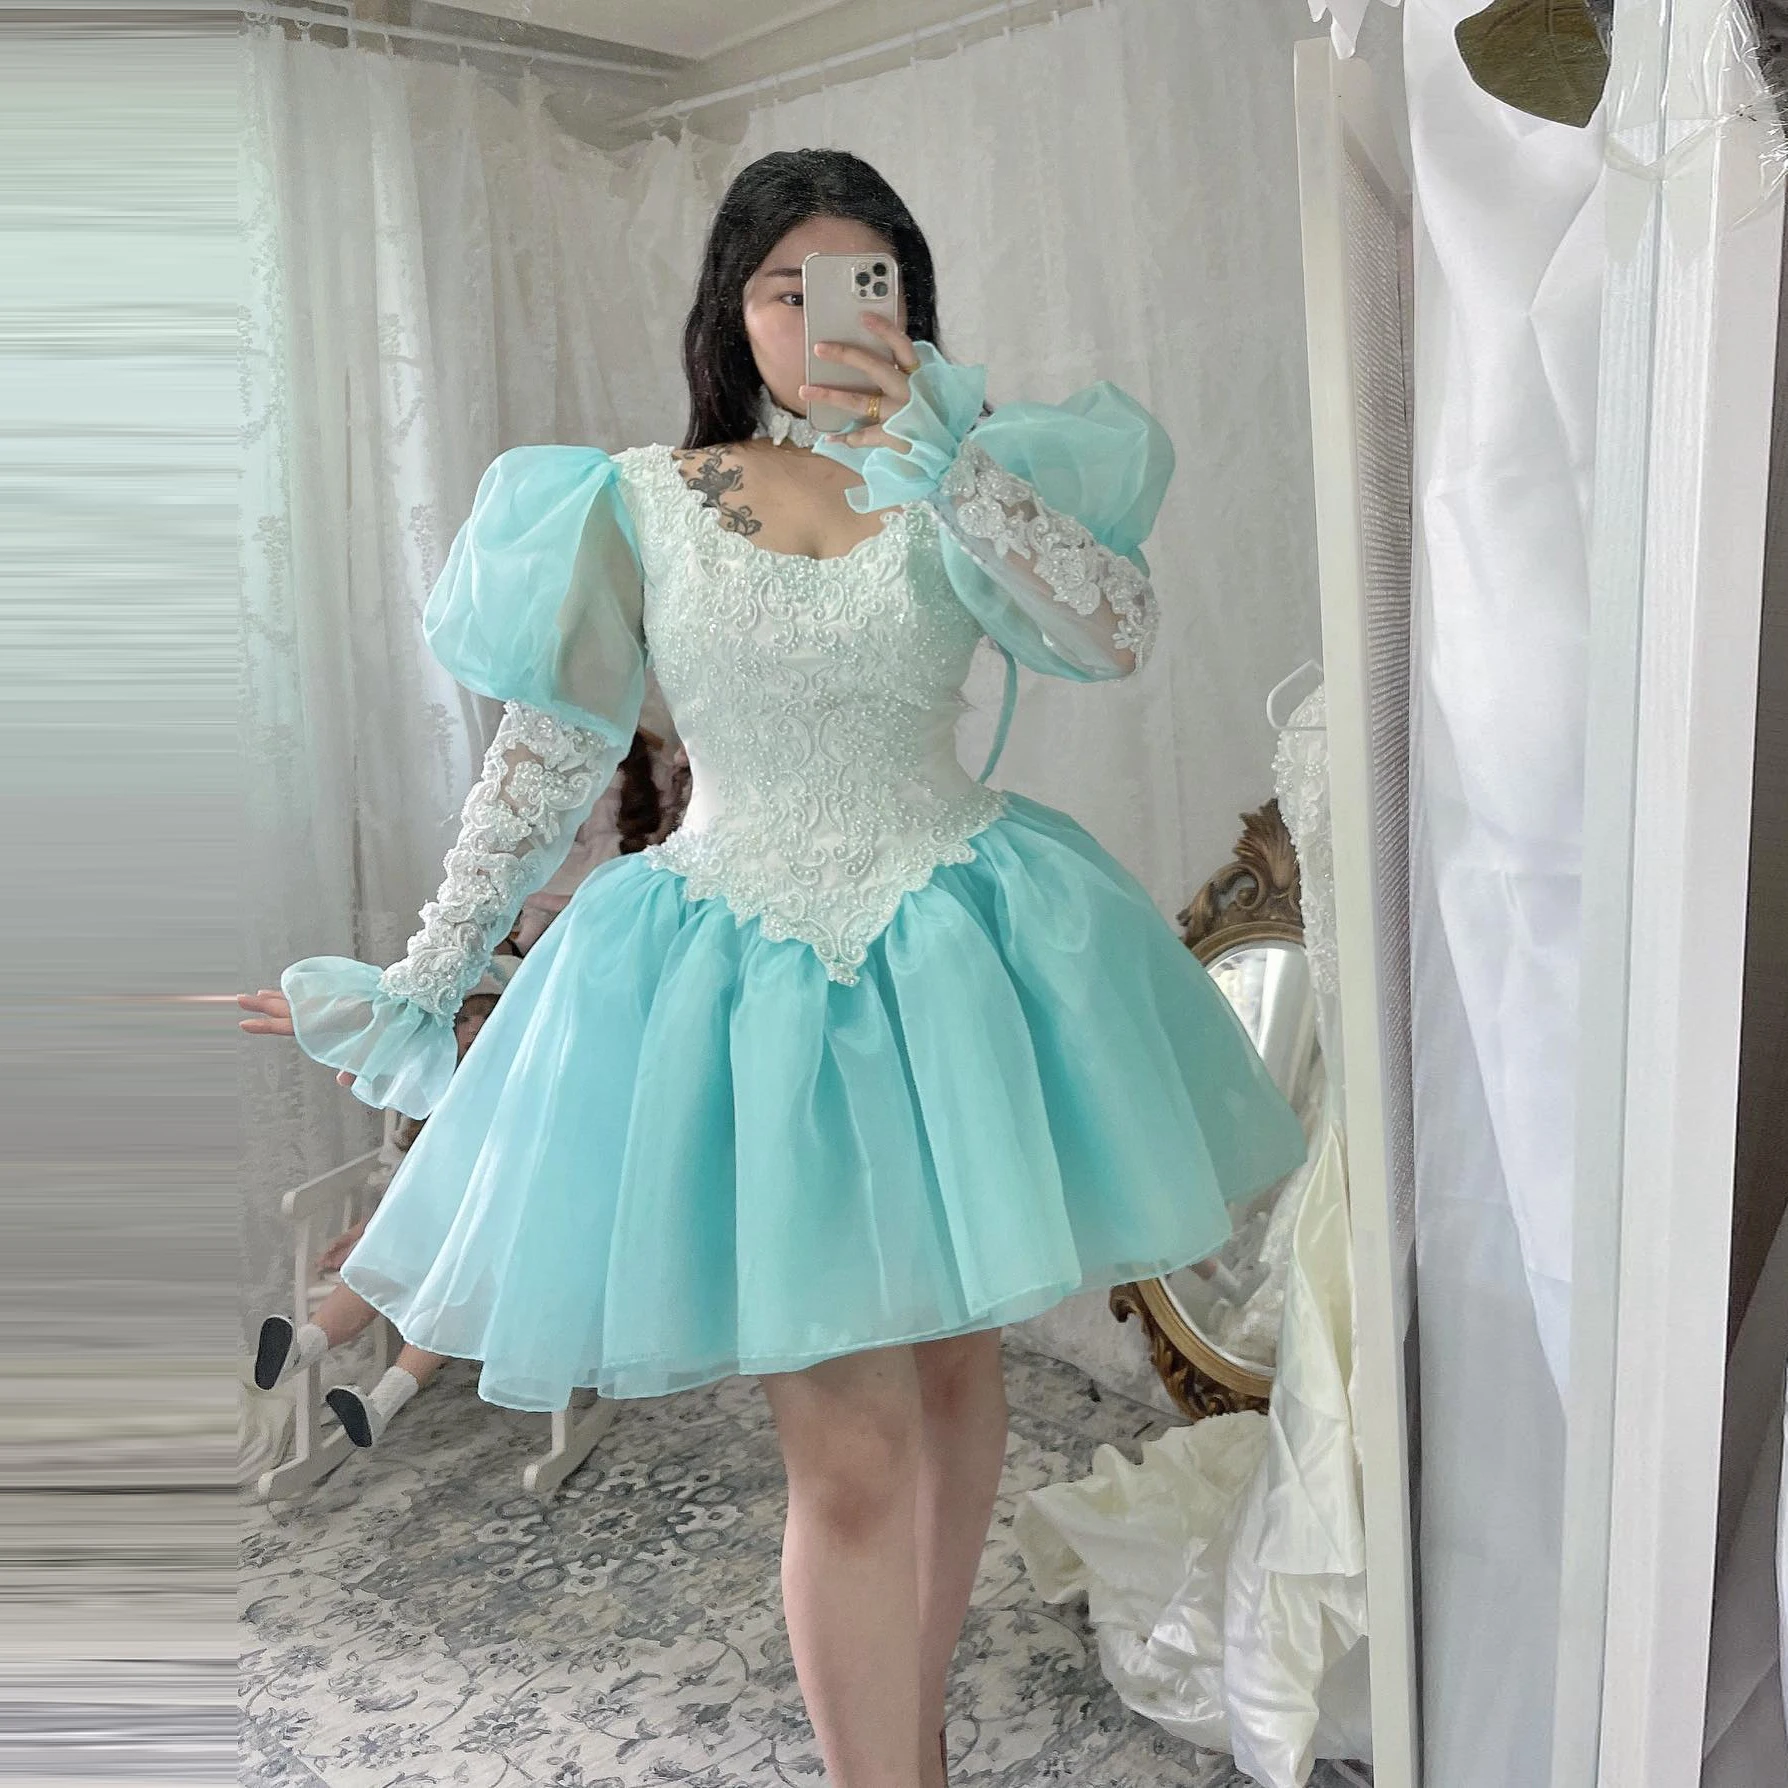 

Princess Puffy Mesh Prom Dresses Pretty Appliques Pearls A Line Women Summer Formal Gowns Ruffles Tulle Brithday Party Dress